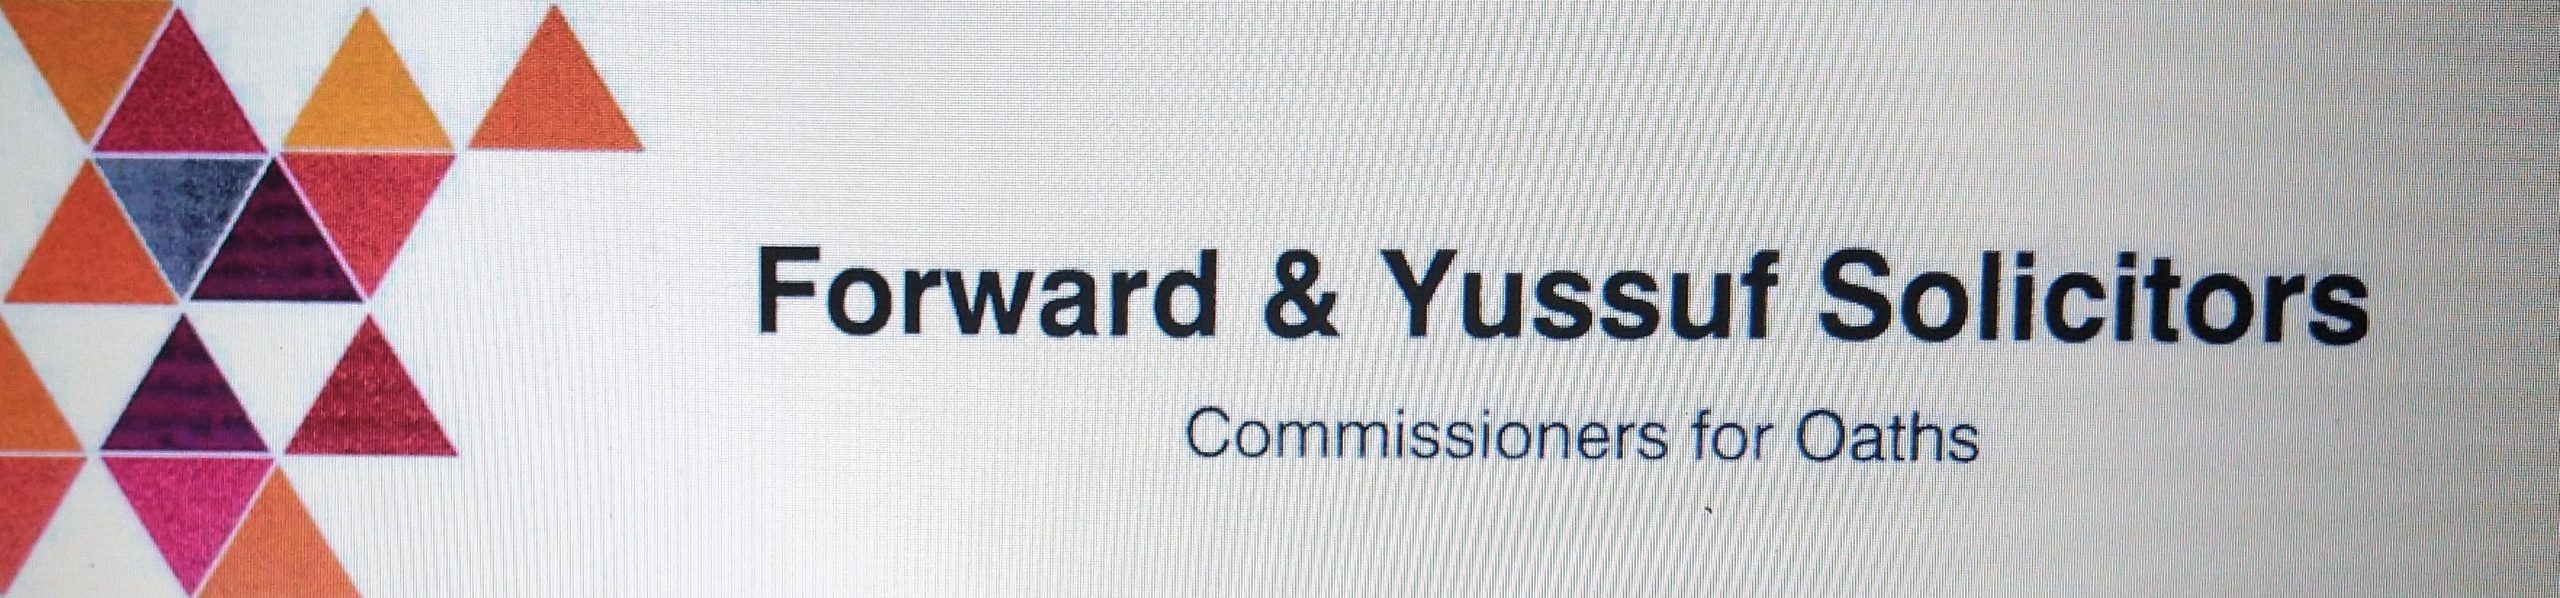 Forward & Yussuf Solicitors